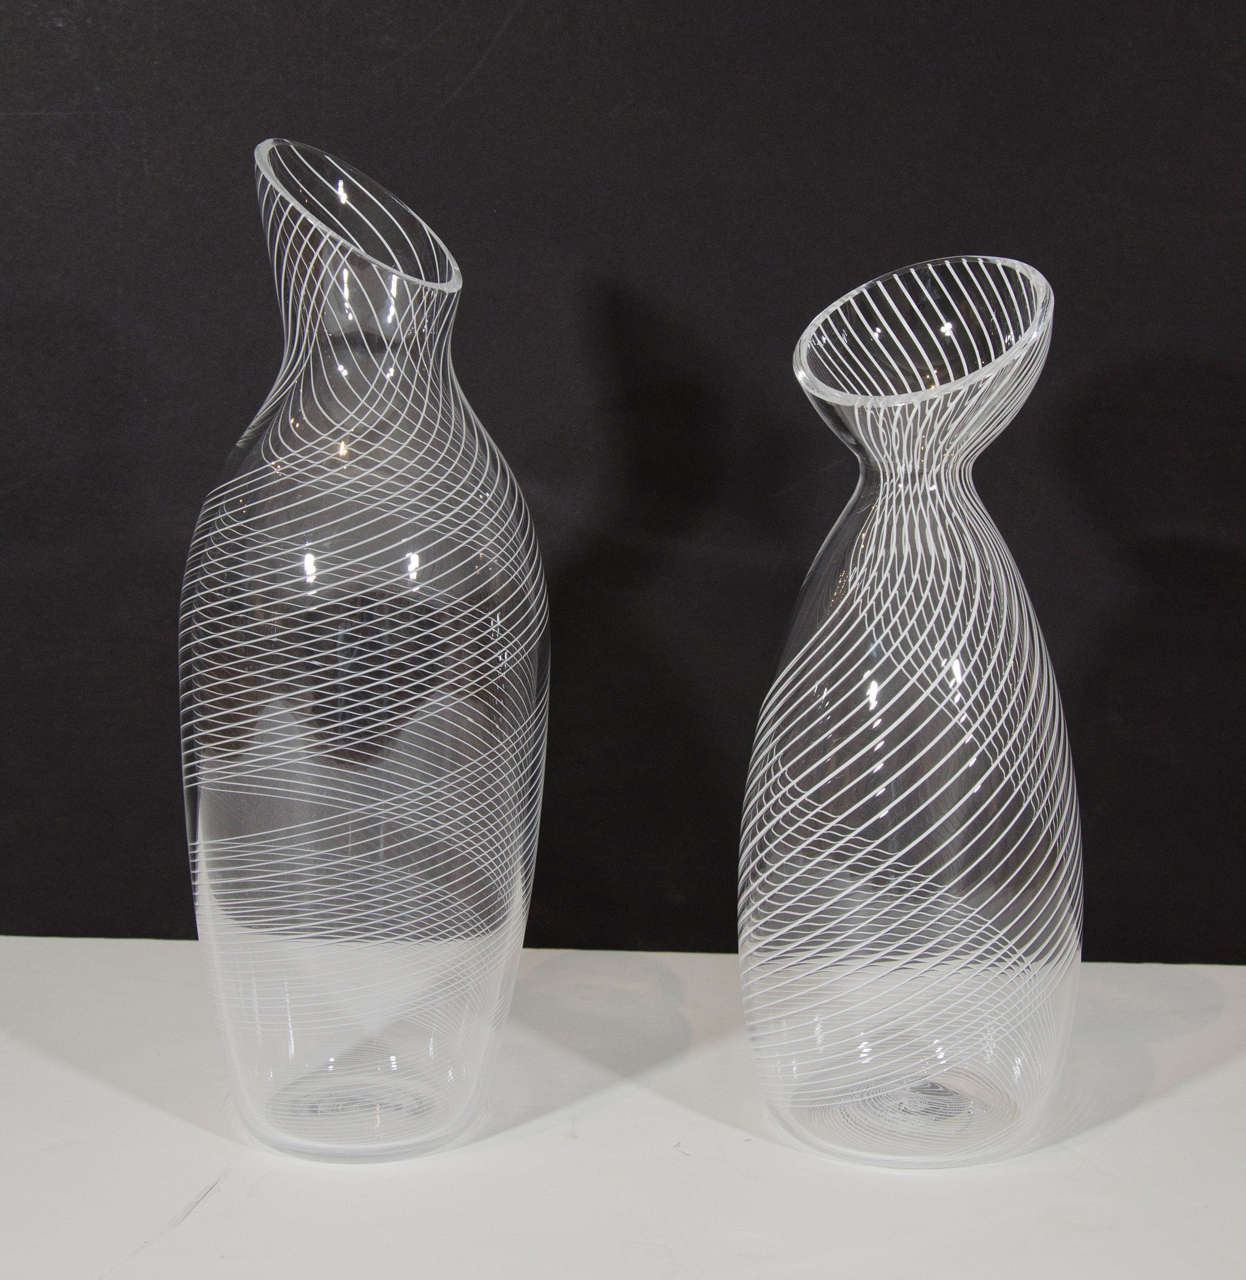 Hand-blown glass decanters by Cartwright New York. Made locally in Brooklyn.  Sold separately. Sizes vary but approximately 12